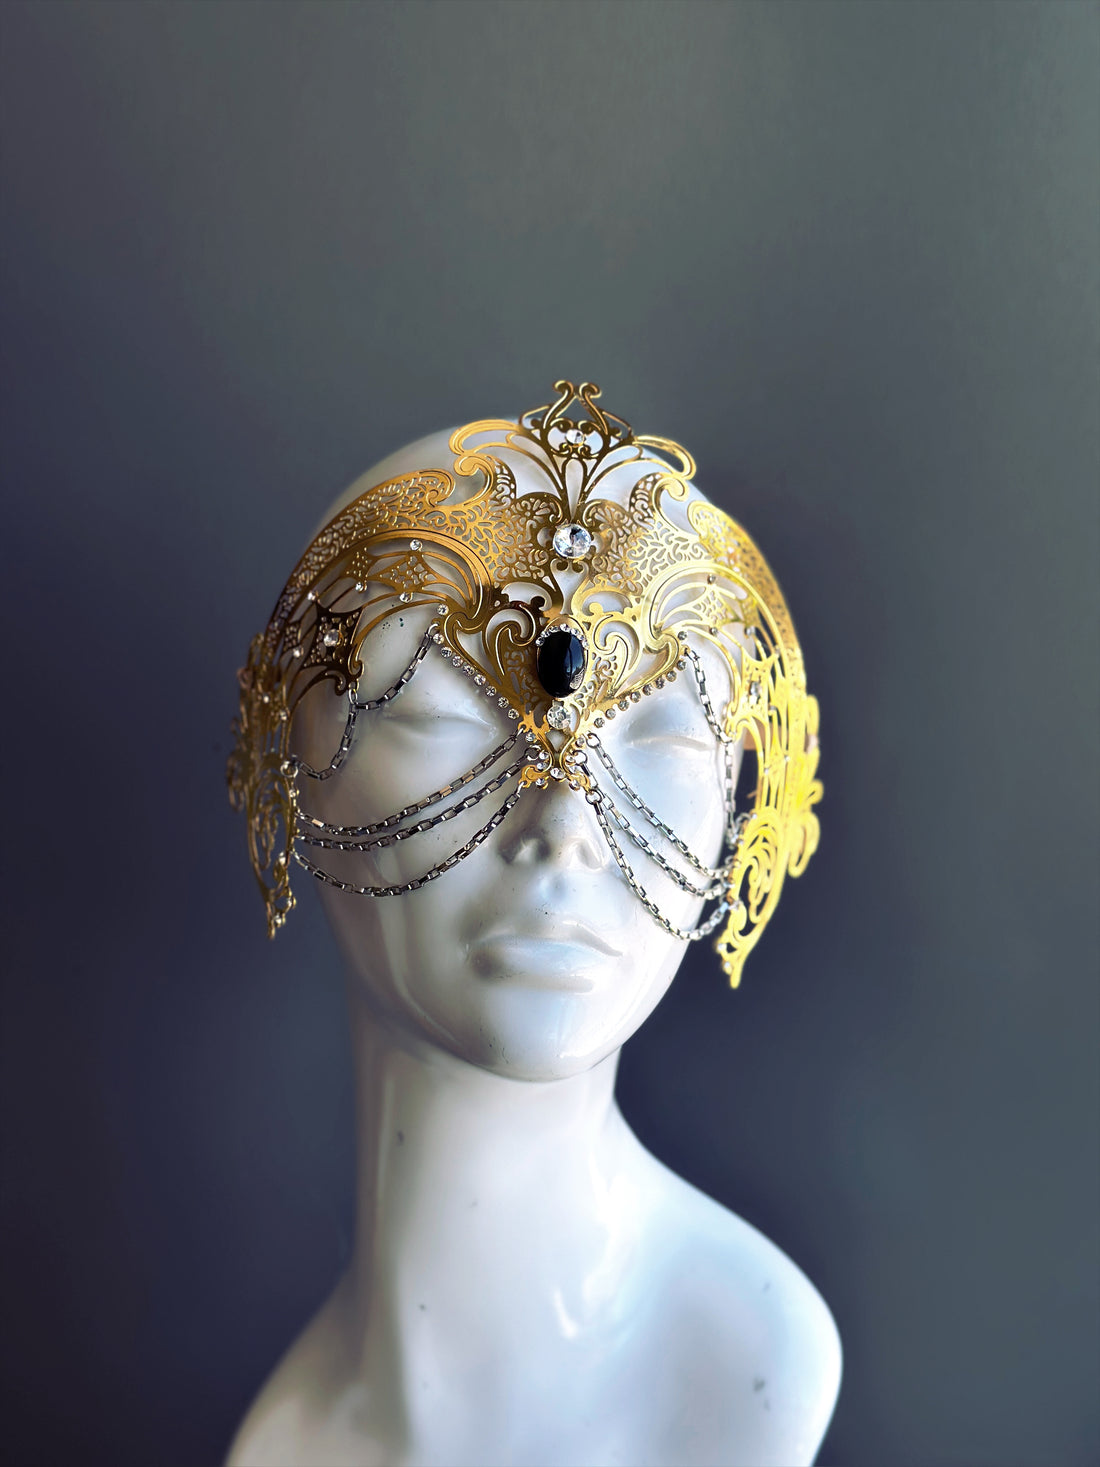 Womens masquerade mask in gold laser-cut metal with rhinestones and chains for sale.